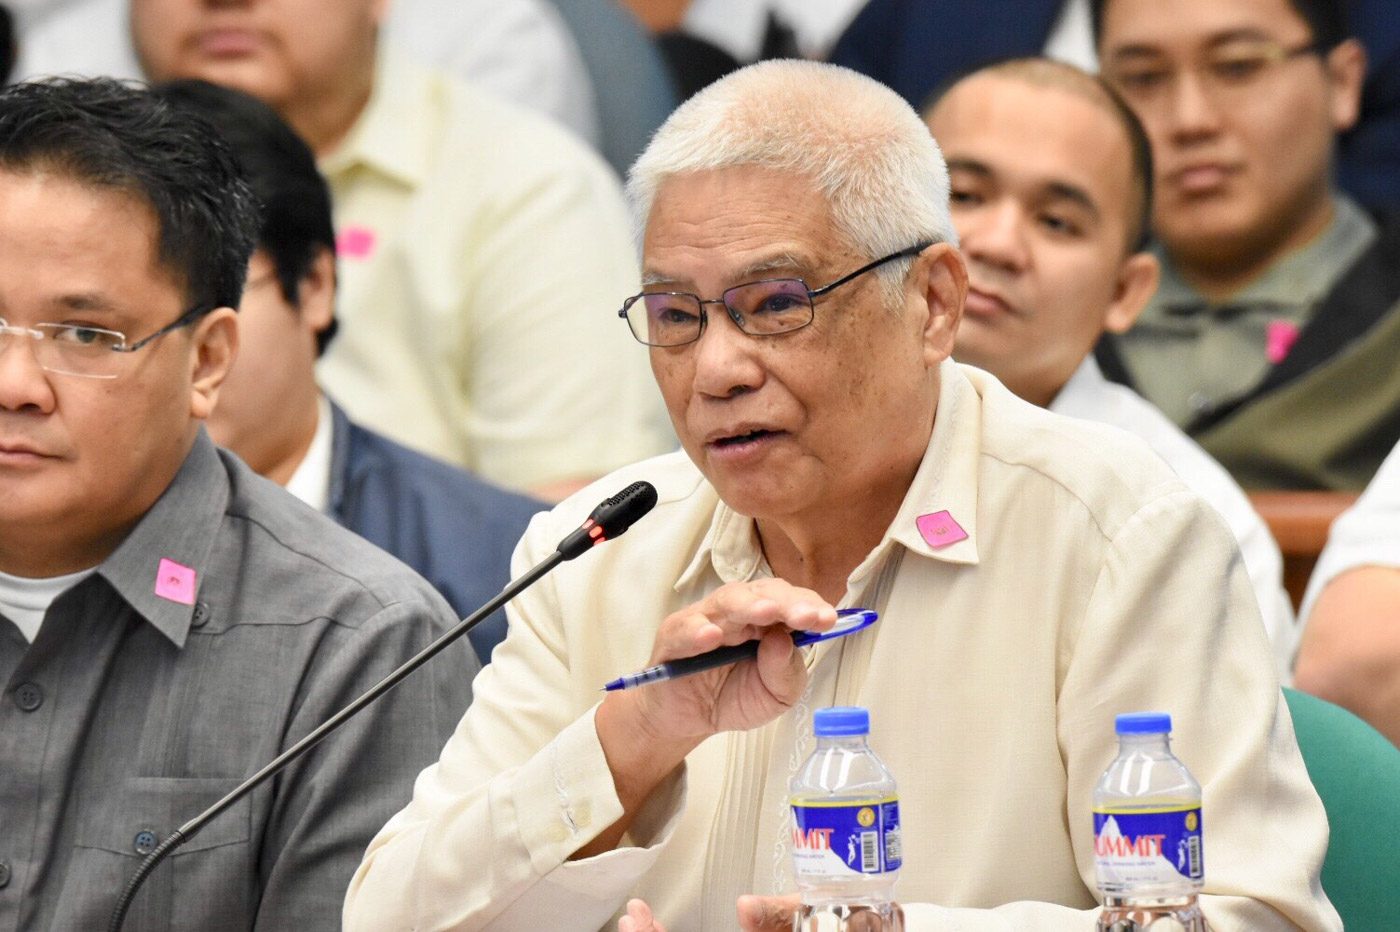 DICT’s defense over intel funds ‘deceiving and unbelievable’ – Rio